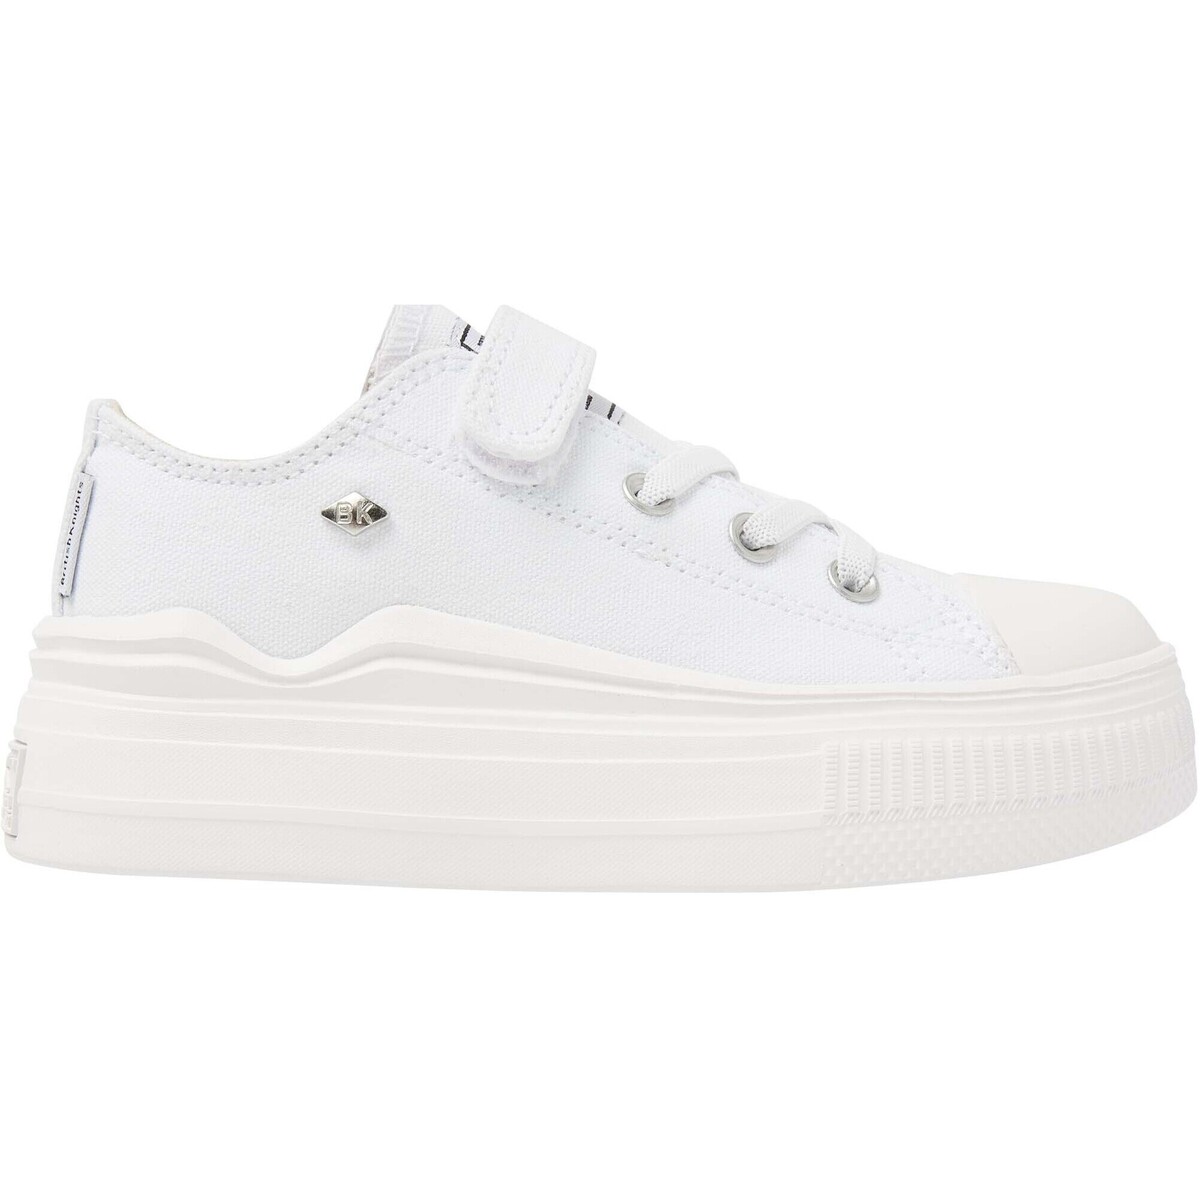 Chaussures Femme Nothing says quintessential British style quite like KAYA FLOW LOW FILLES BASKETS BASSE Blanc